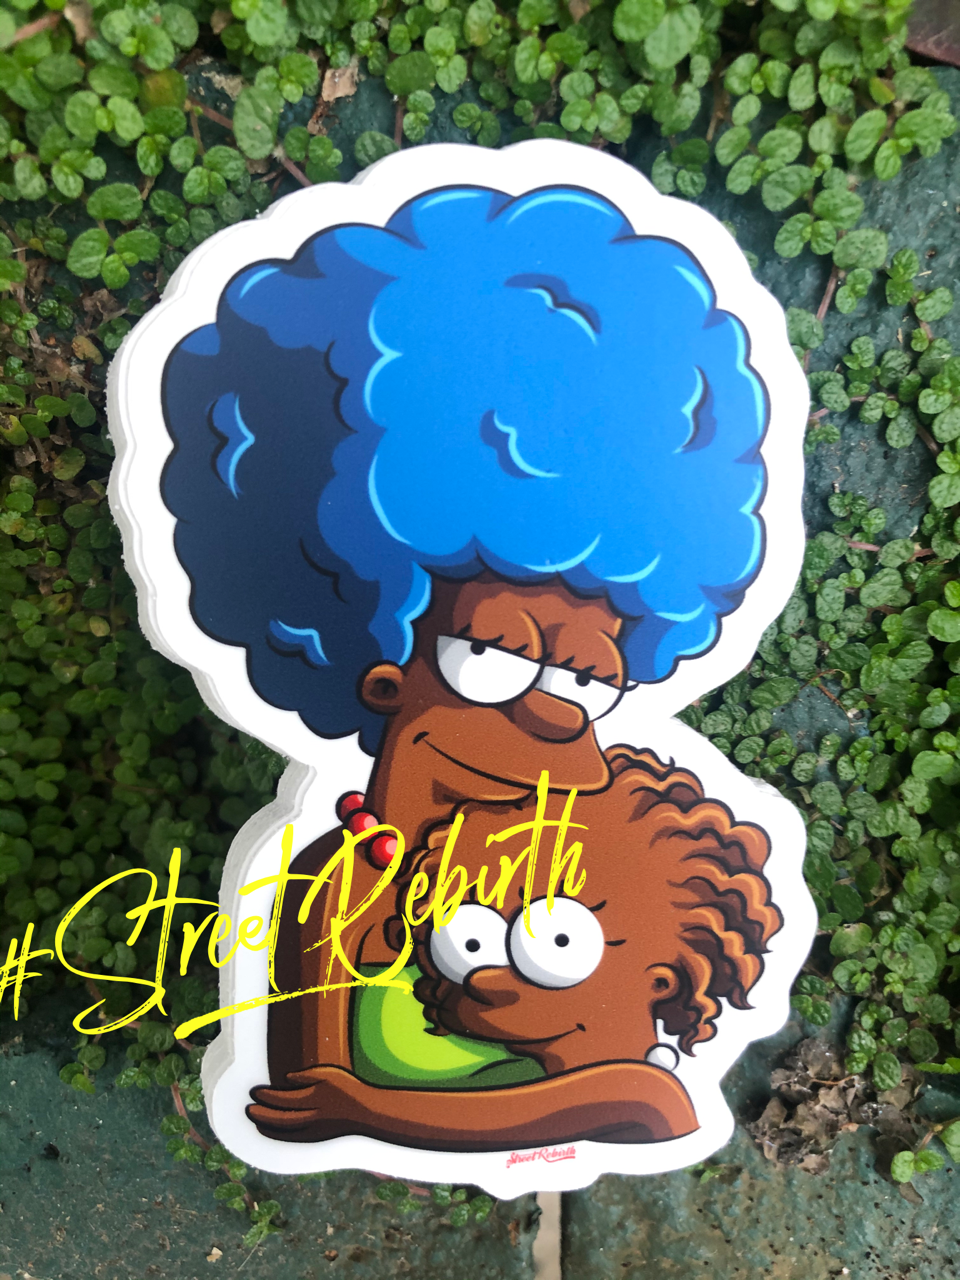 1 Afro Marge Sticker – One 4 Inch Water Proof Vinyl Sticker – For Hydro Flask, Skateboard, Laptop, Planner, Car, Collecting, Gifting